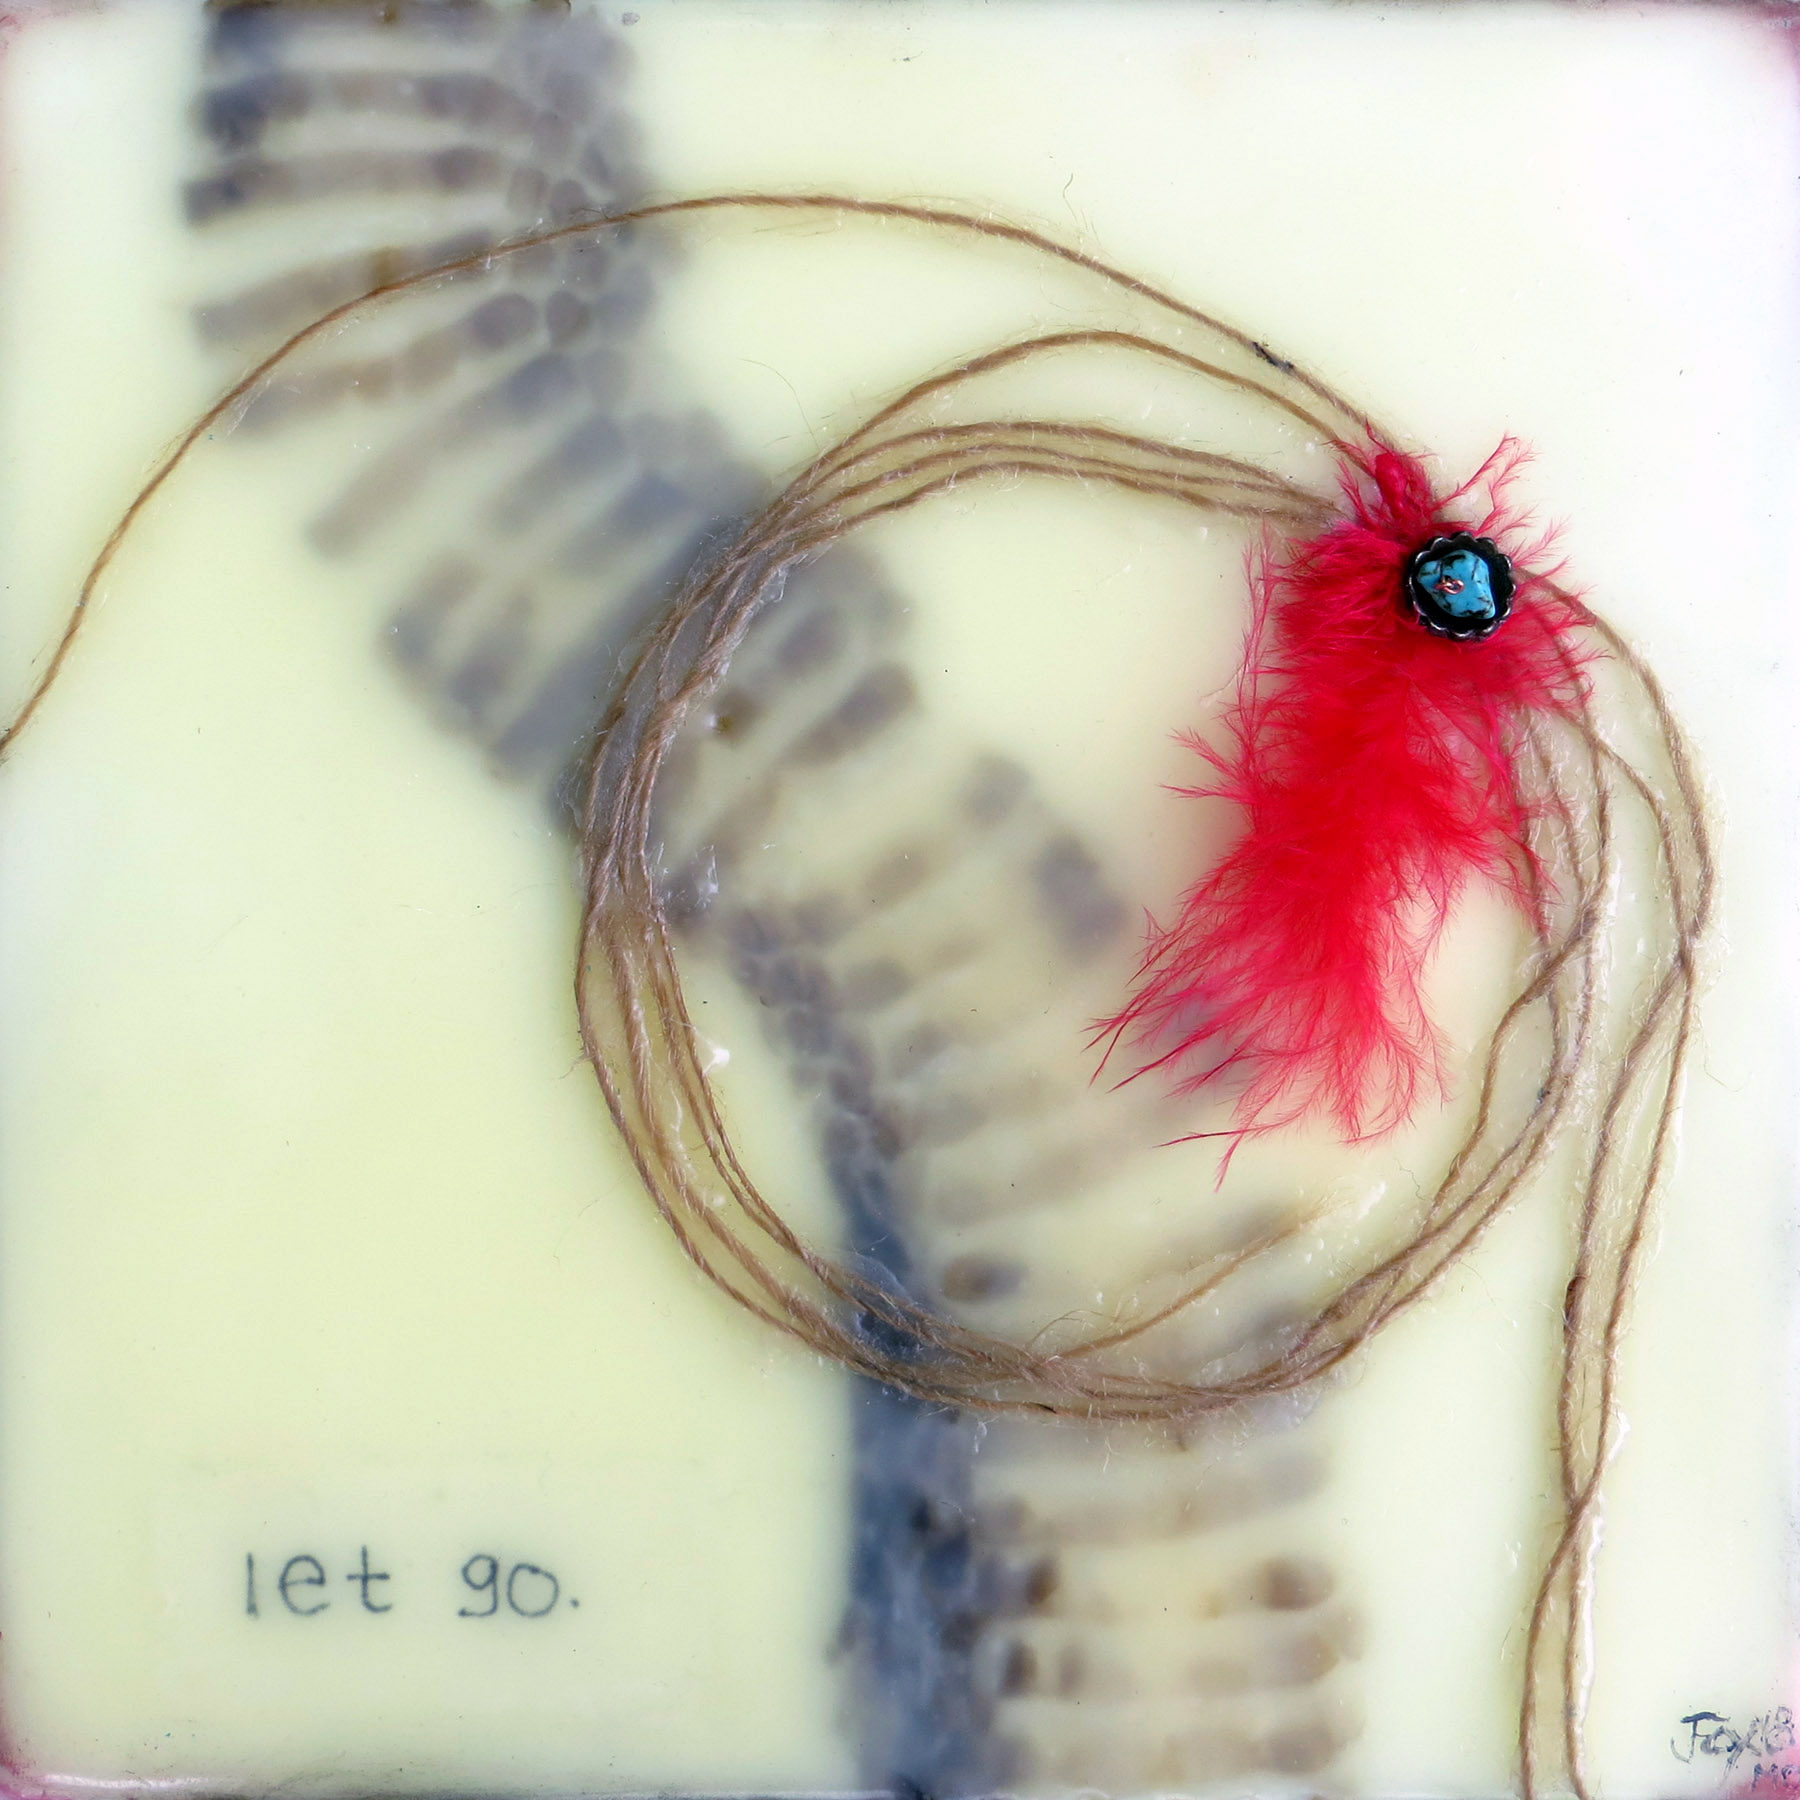 Image of an encaustic painting by Janet Fox including shedded snake skin, twine, red feather, copper bead and turquoise bead with the words "Let Go."